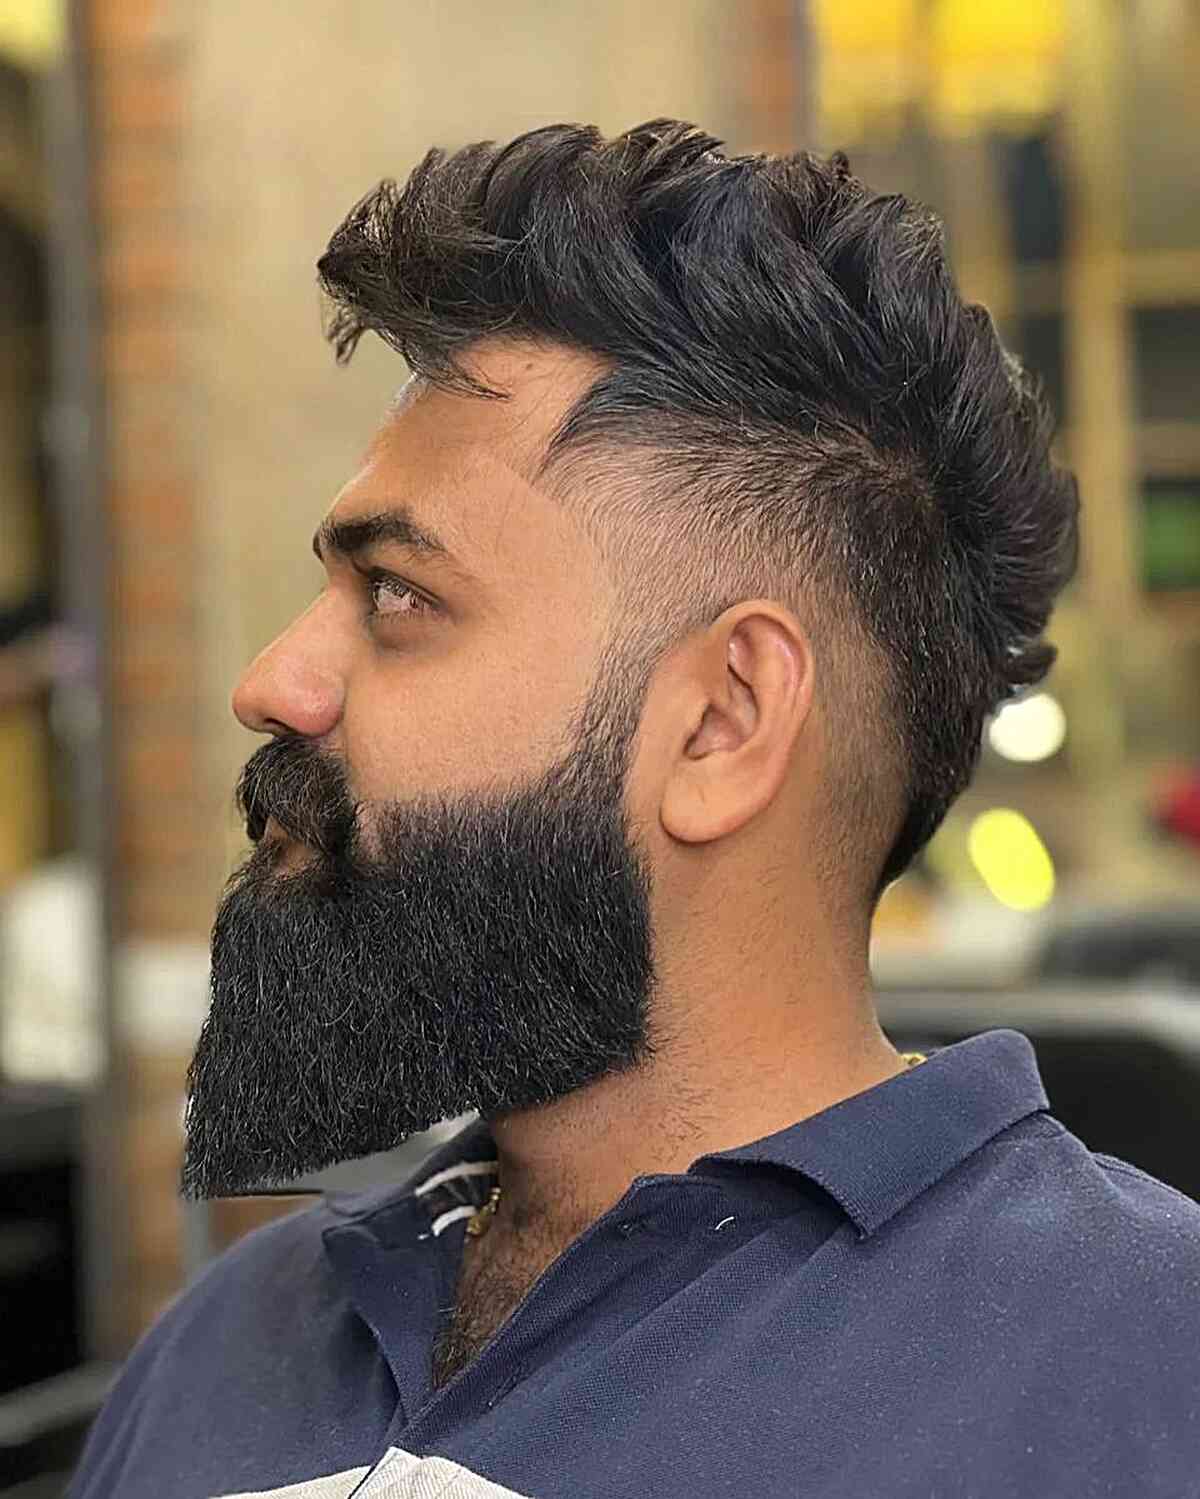 Low Fade with a Layered Long Top for Men with beards